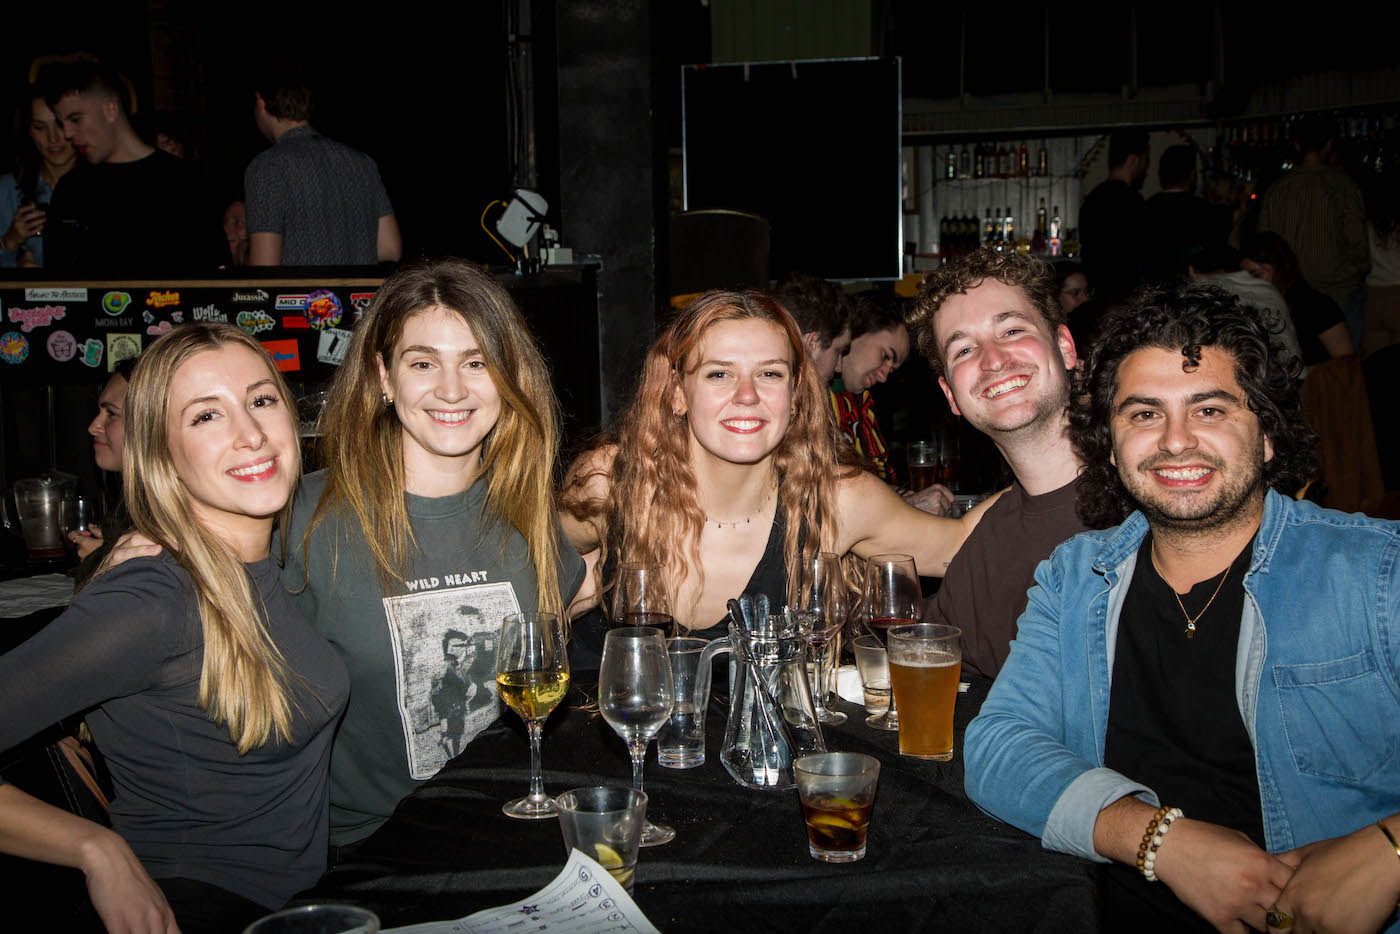 DDB Melbourne takes home the Golden Brain in Youngblood VIC’s Agency vs Agency Trivia